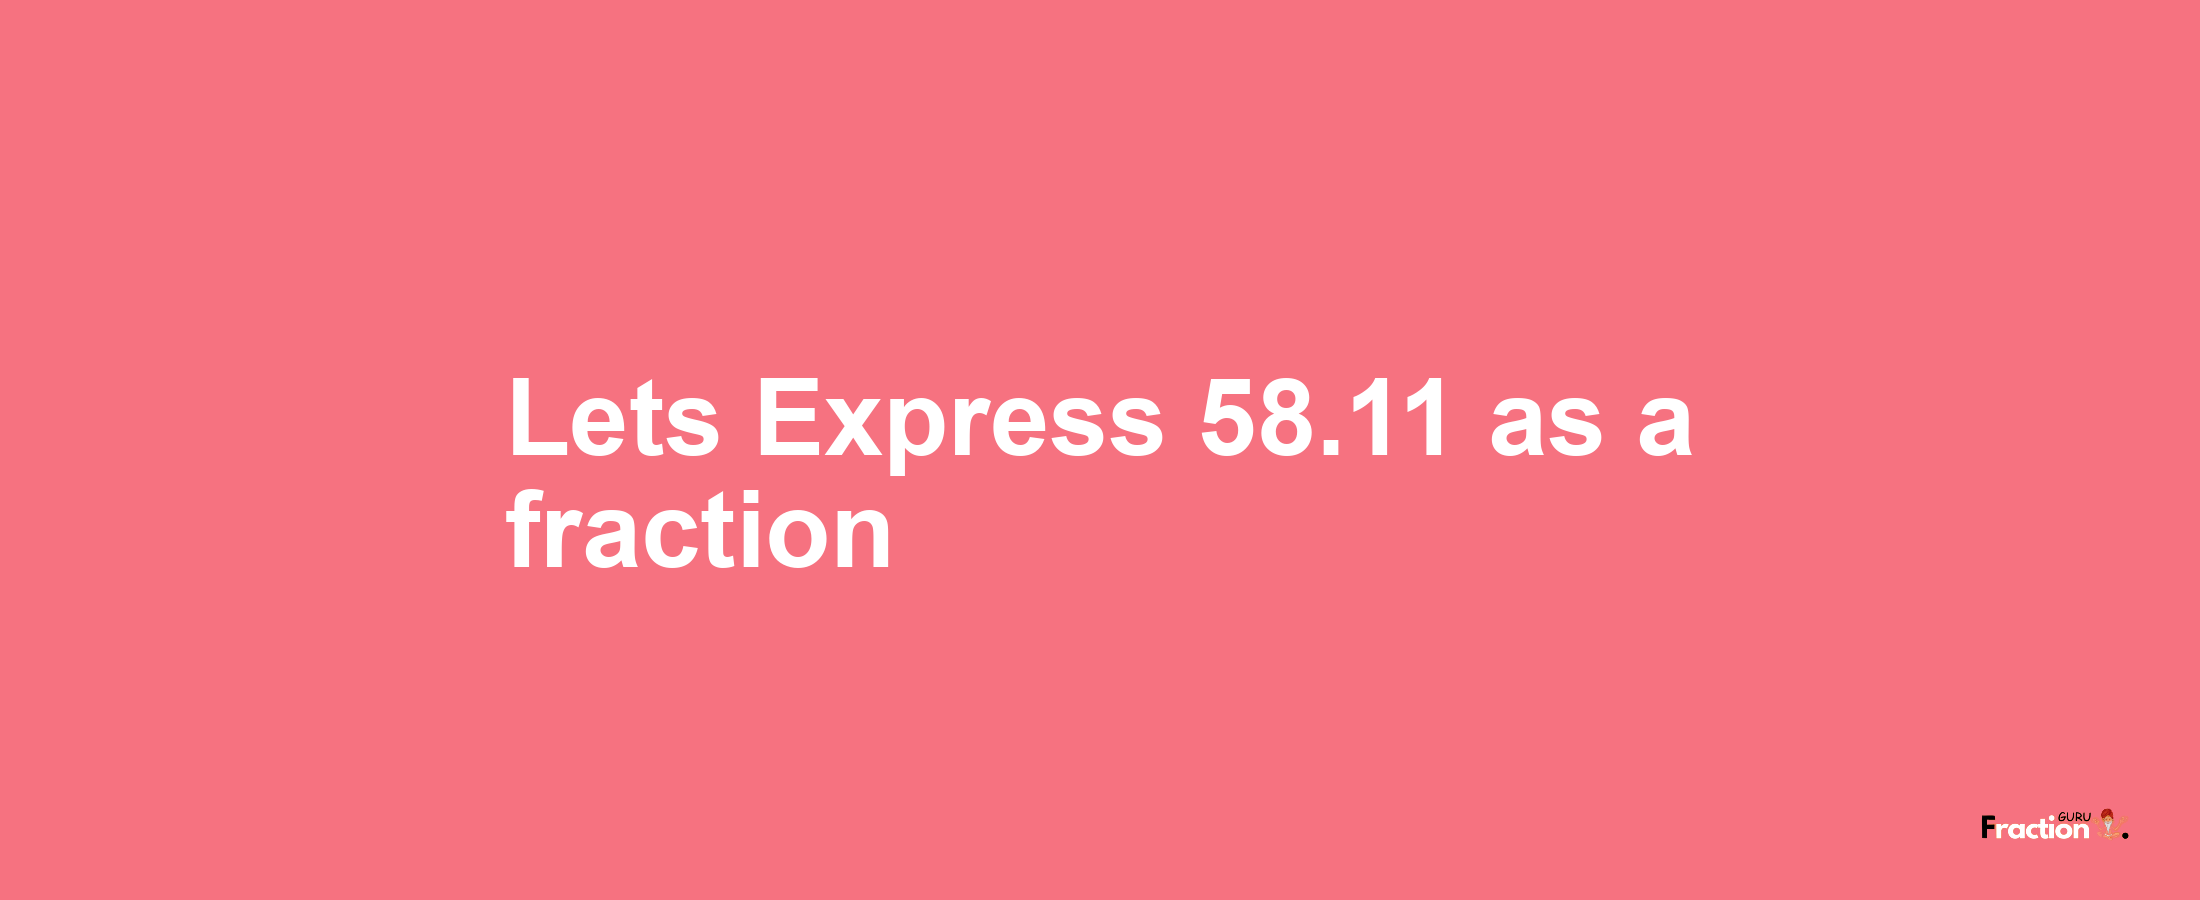 Lets Express 58.11 as afraction